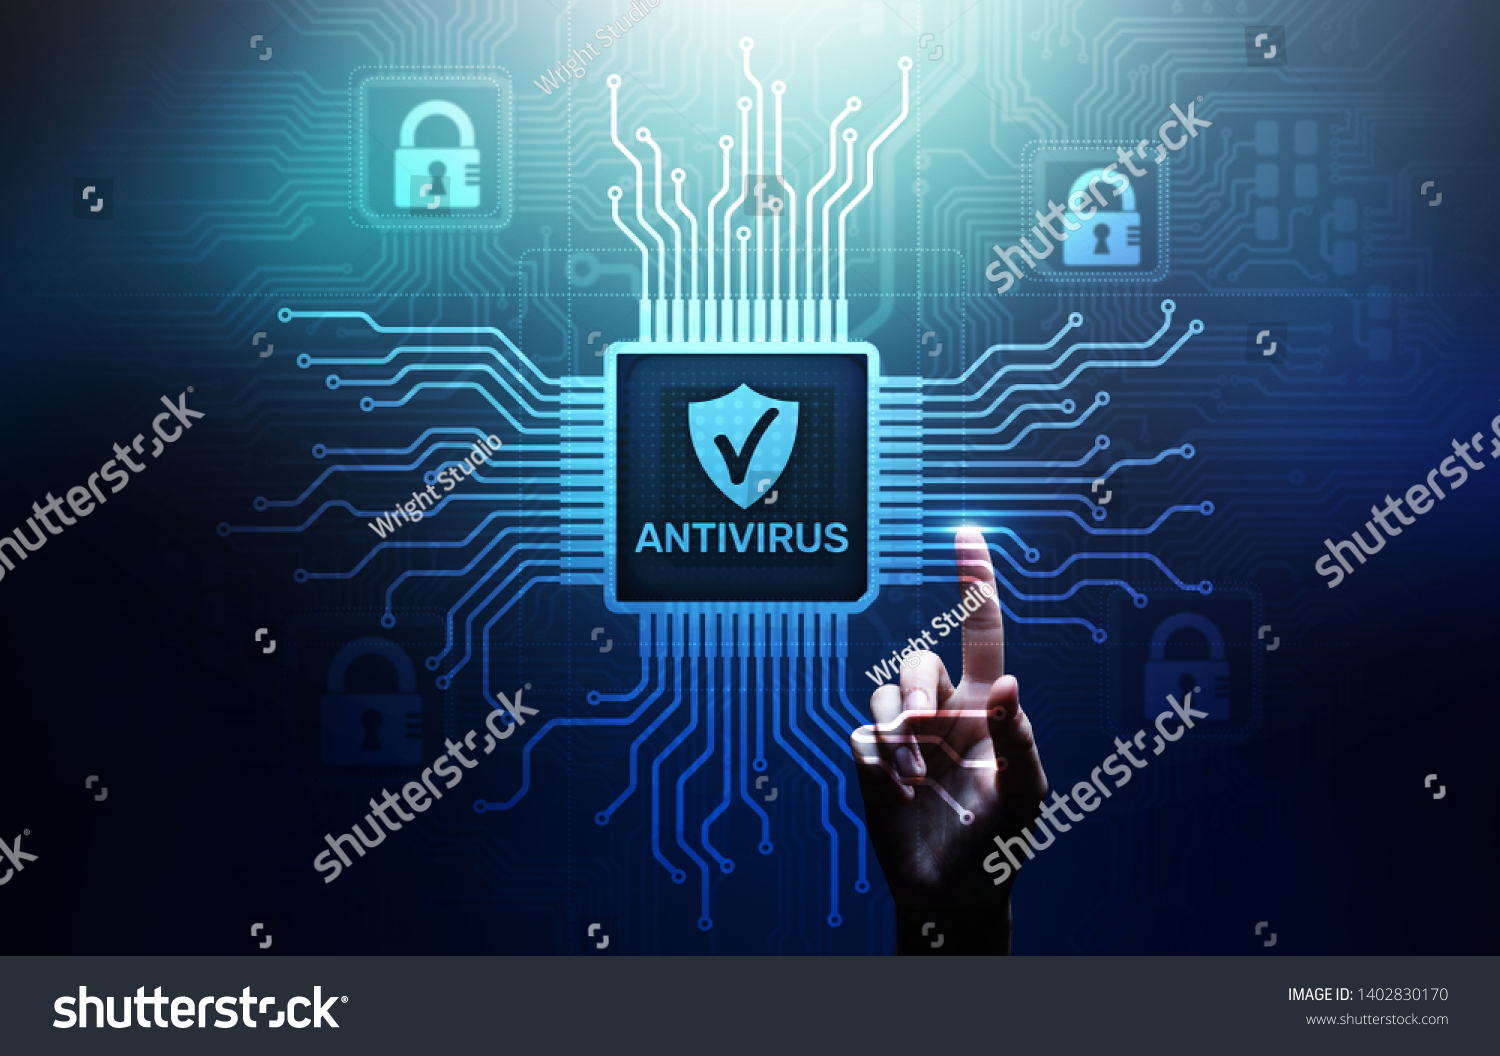 Antivirus Cyber security Data protection Technology concept on virtual screen. #1402830170